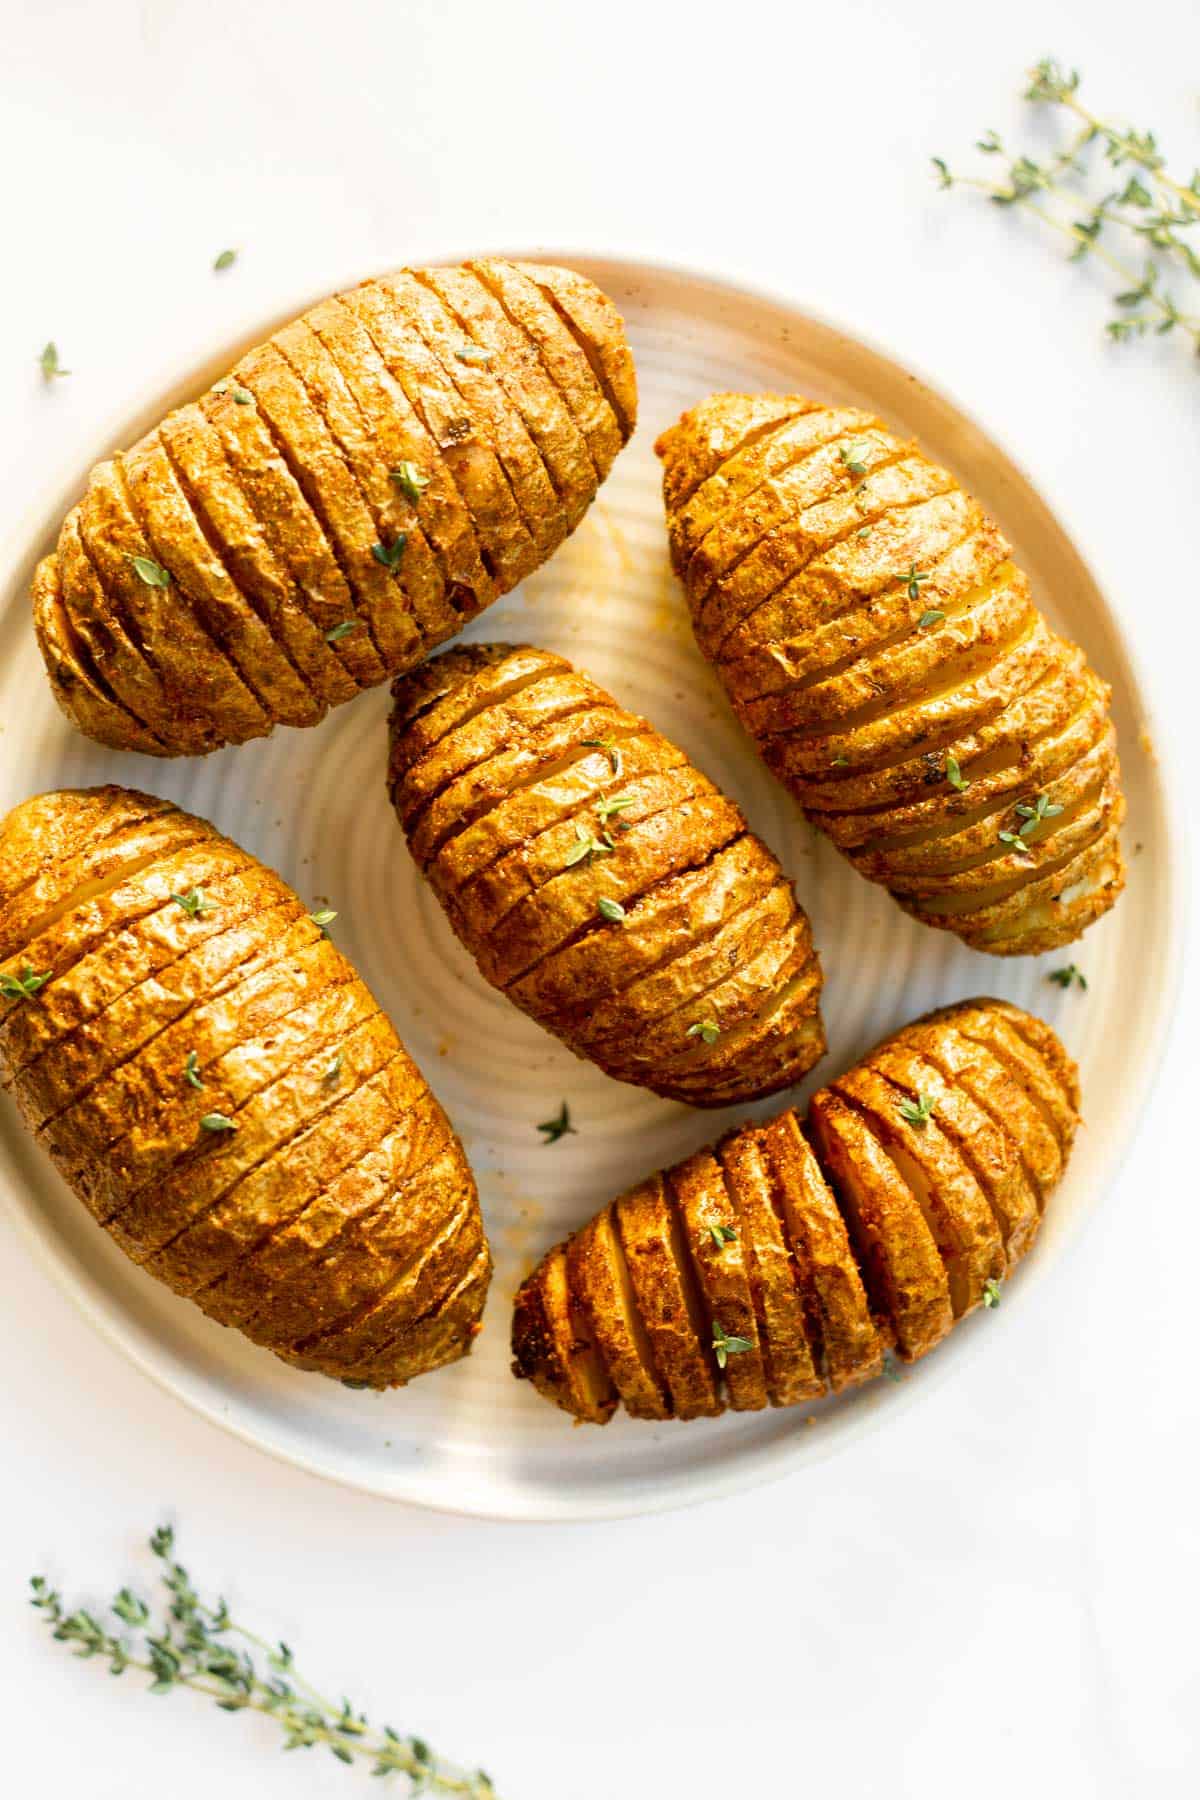 5 hasselback potatoes on a white plate.